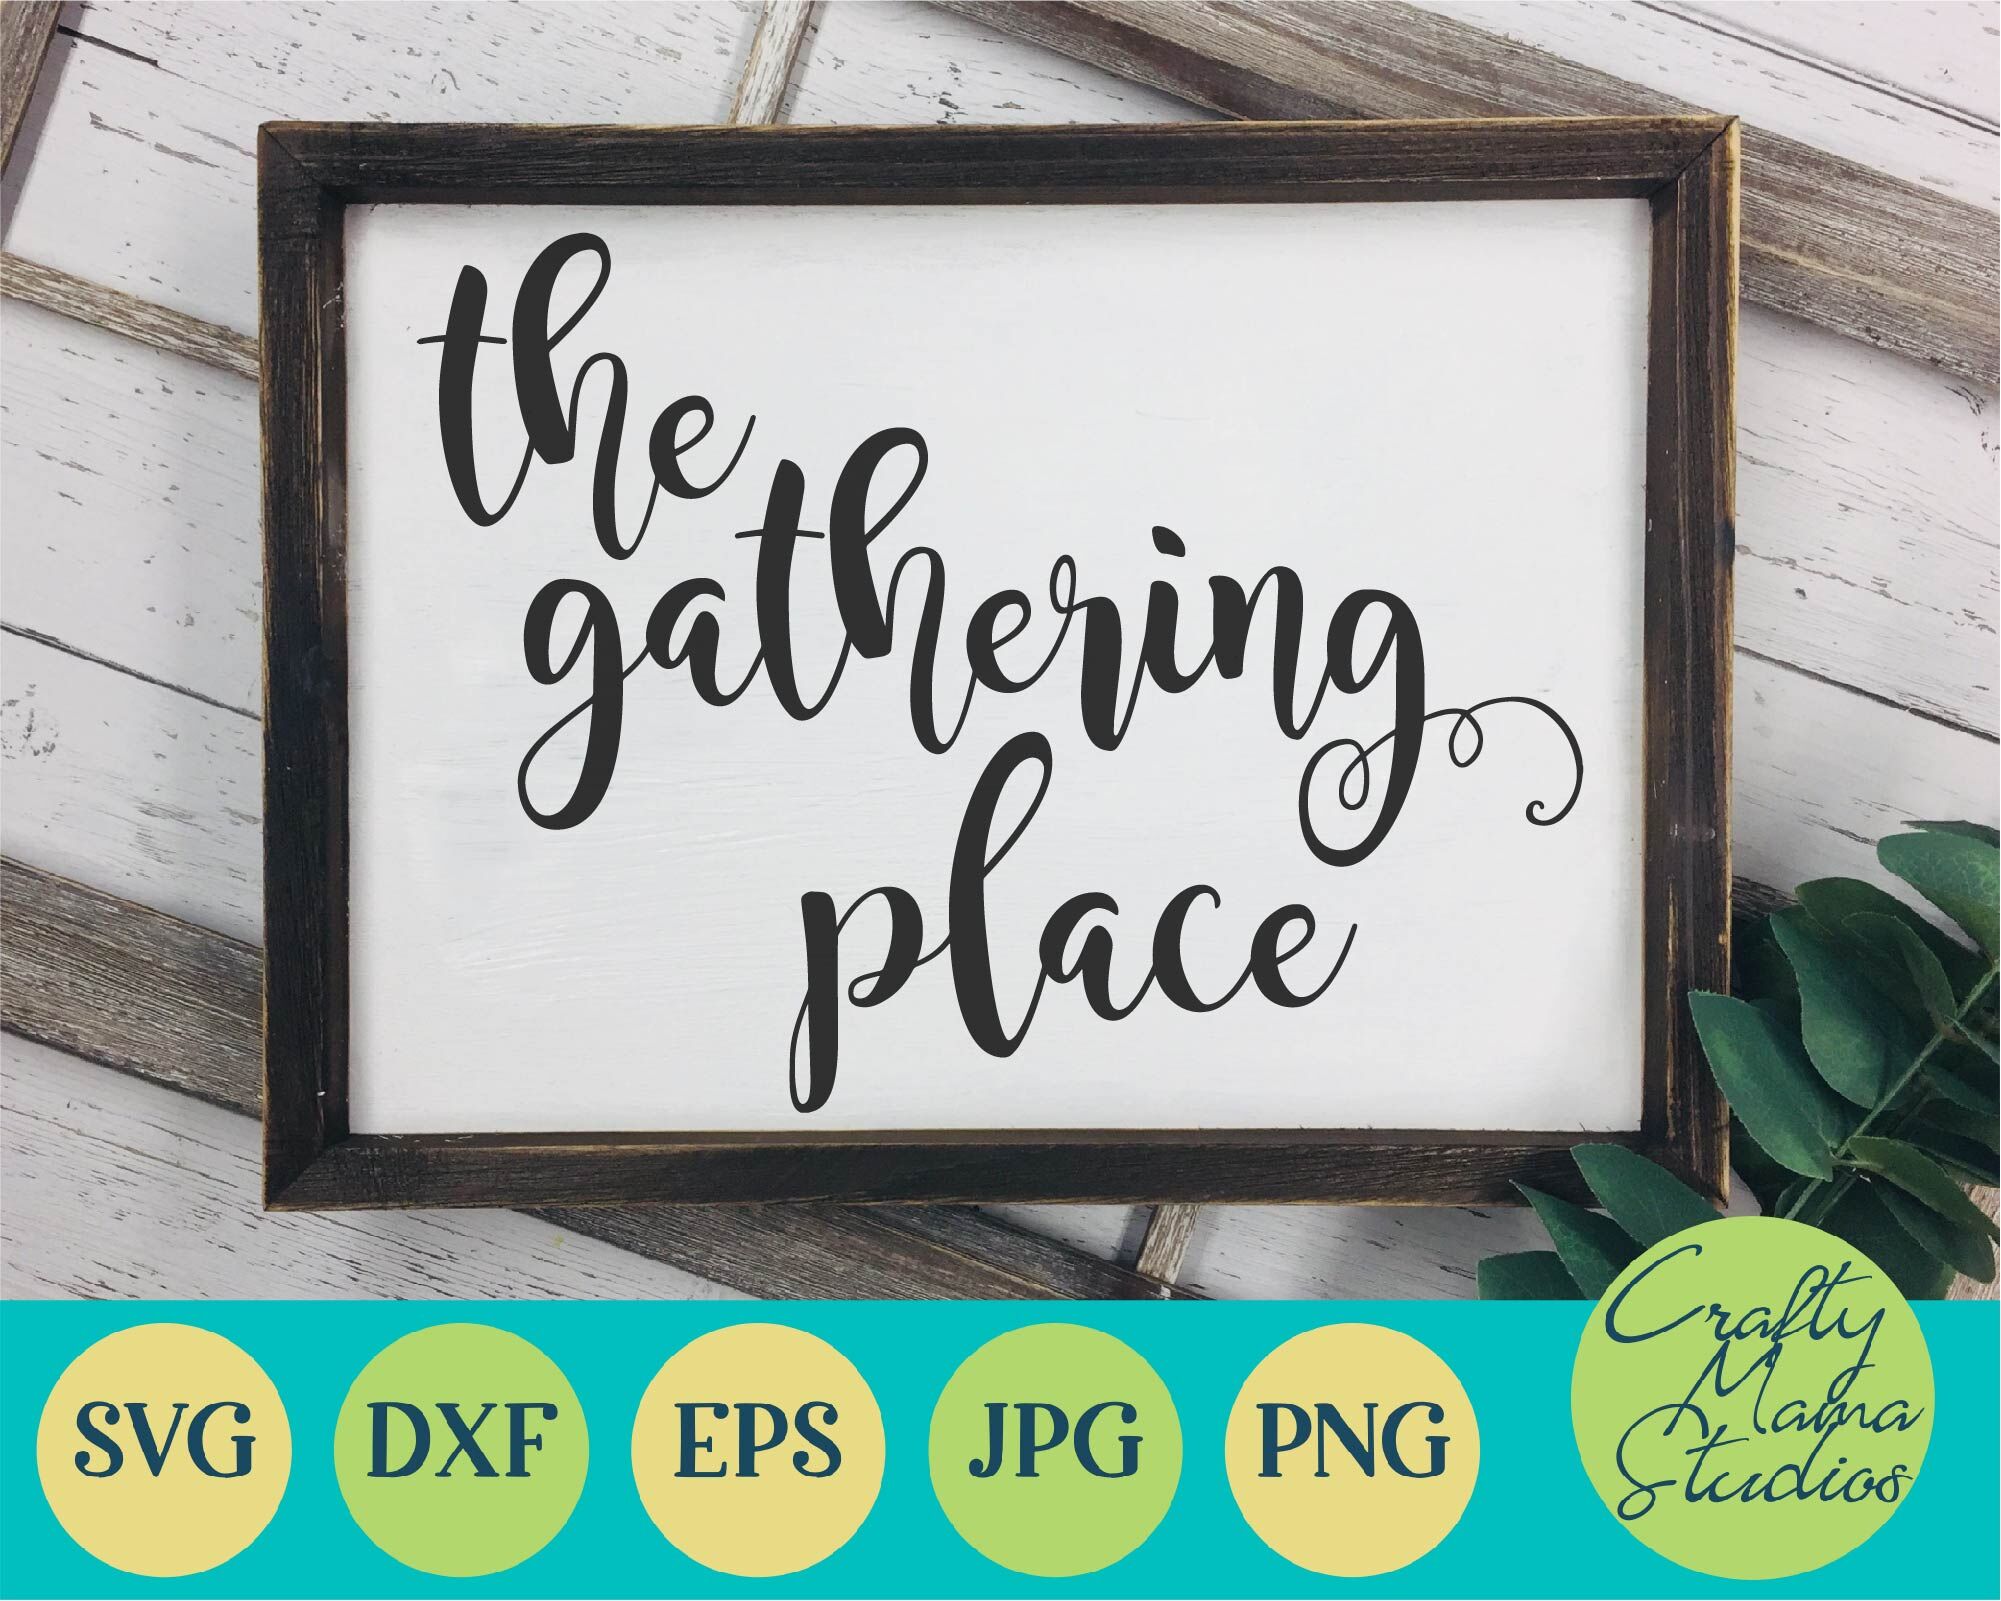 Download The Gathering Place Svg Home Svg Family By Crafty Mama Studios Thehungryjpeg Com